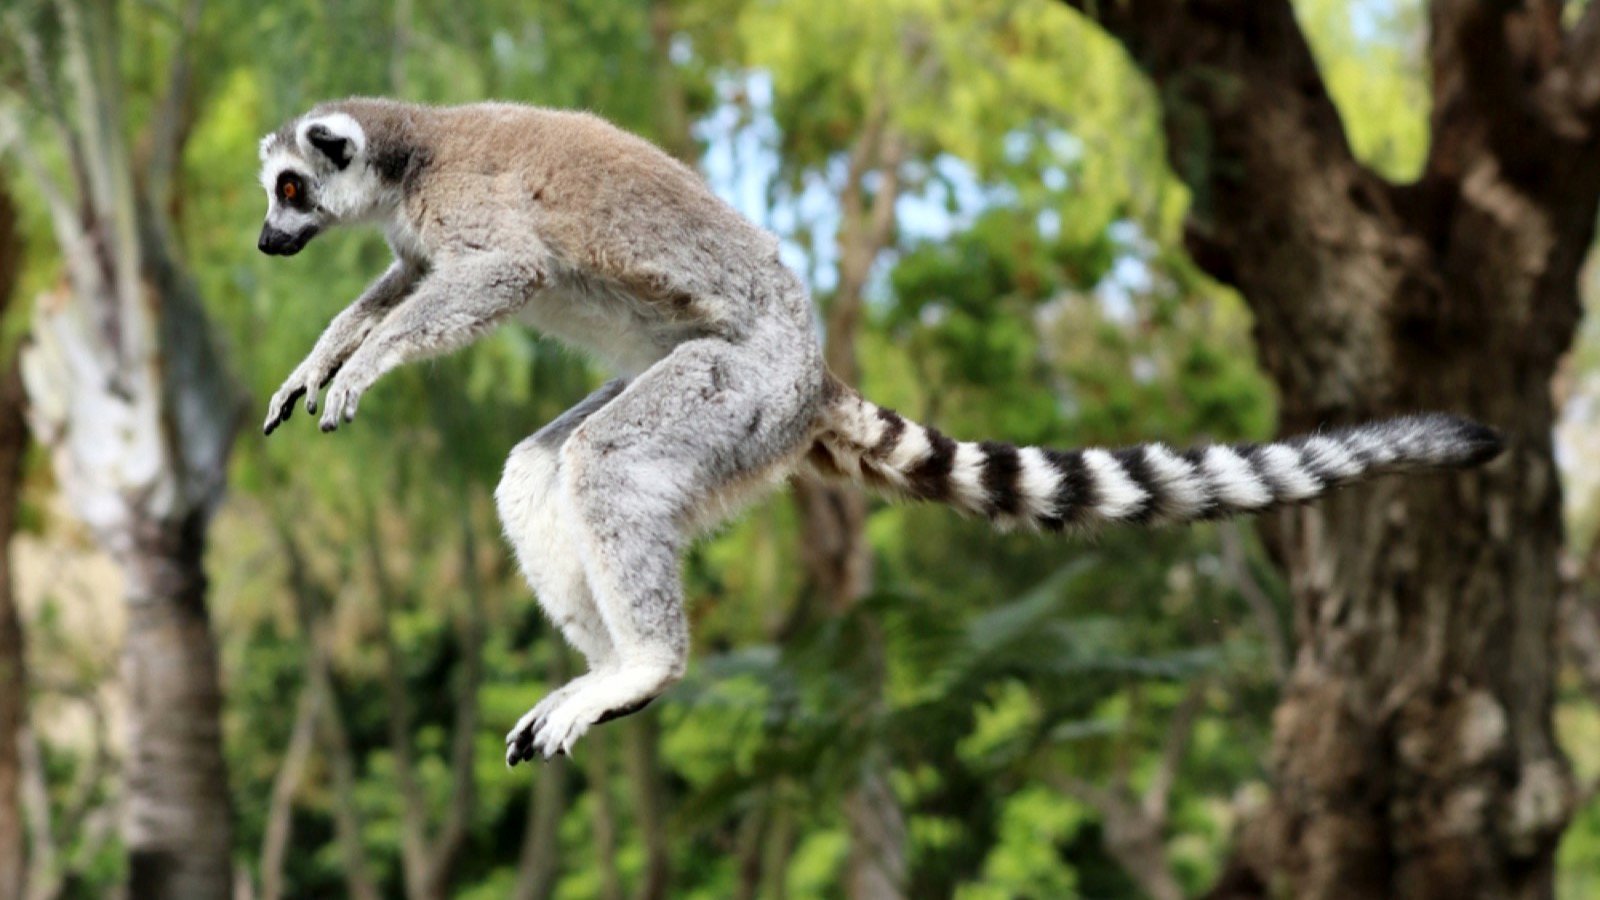 <p>Lemurs are found only in beautiful Madagascar, which has distinct species of flora and fauna. Visit Ranomafana National Park or Andasibe National Park to spot the big-eyed, quirky lemurs leaping through the trees.</p><p>Madagascar is the fifth-largest island worldwide, with over 100 recognized lemur species. Getting close to them will be a memorable experience.</p>